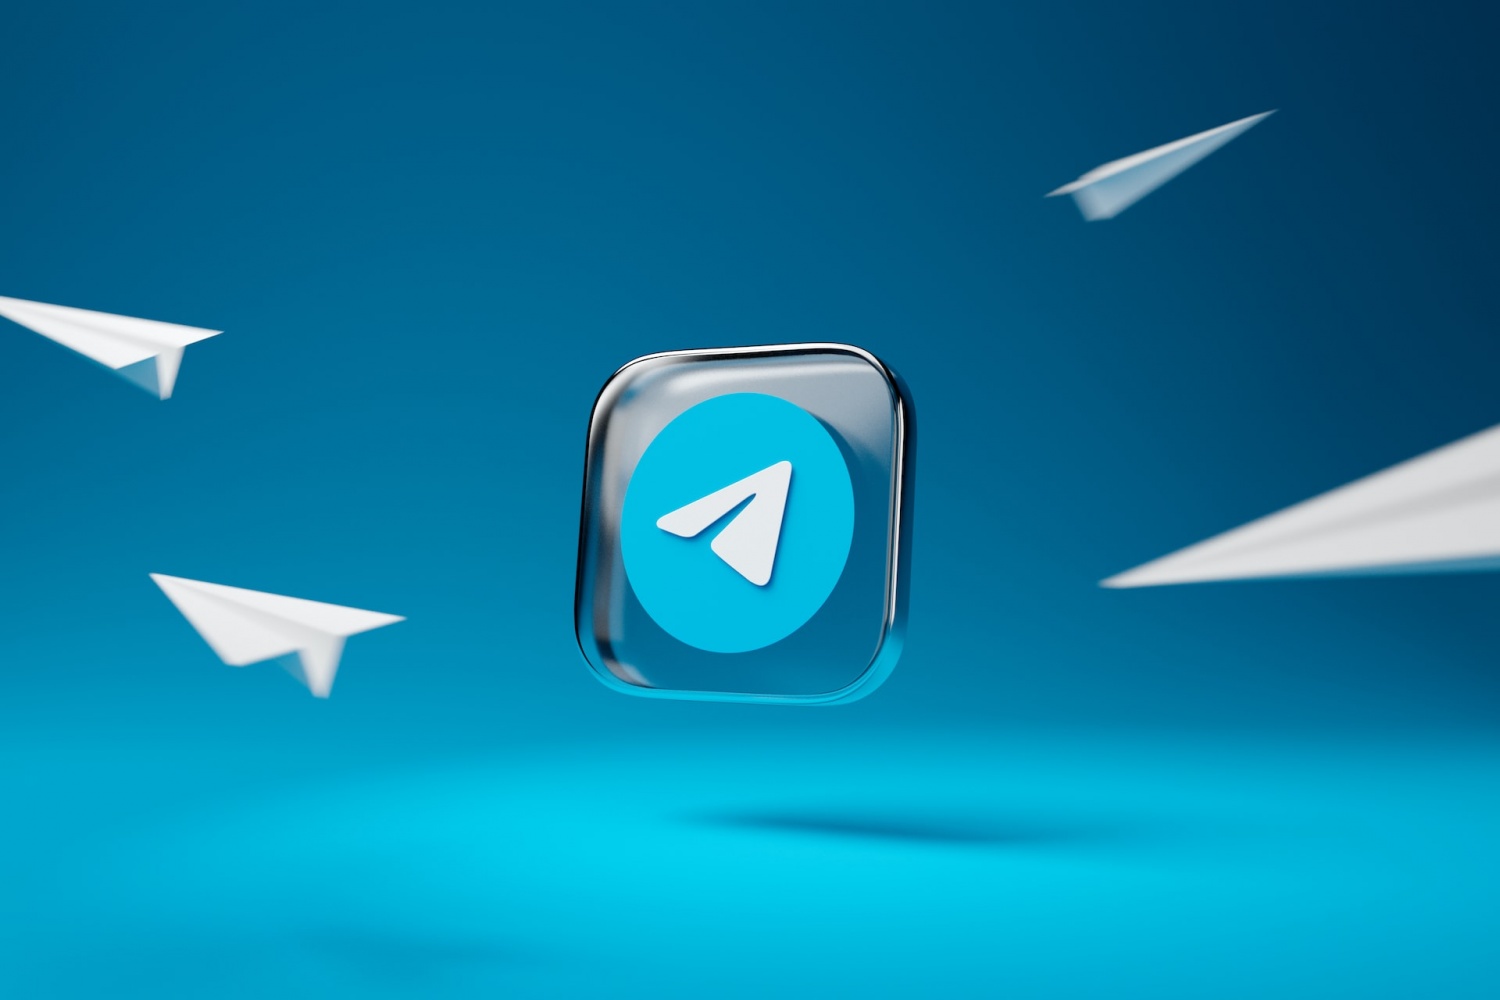 Telegram Brings New Power Saving Mode to Extend Battery Life of Devices